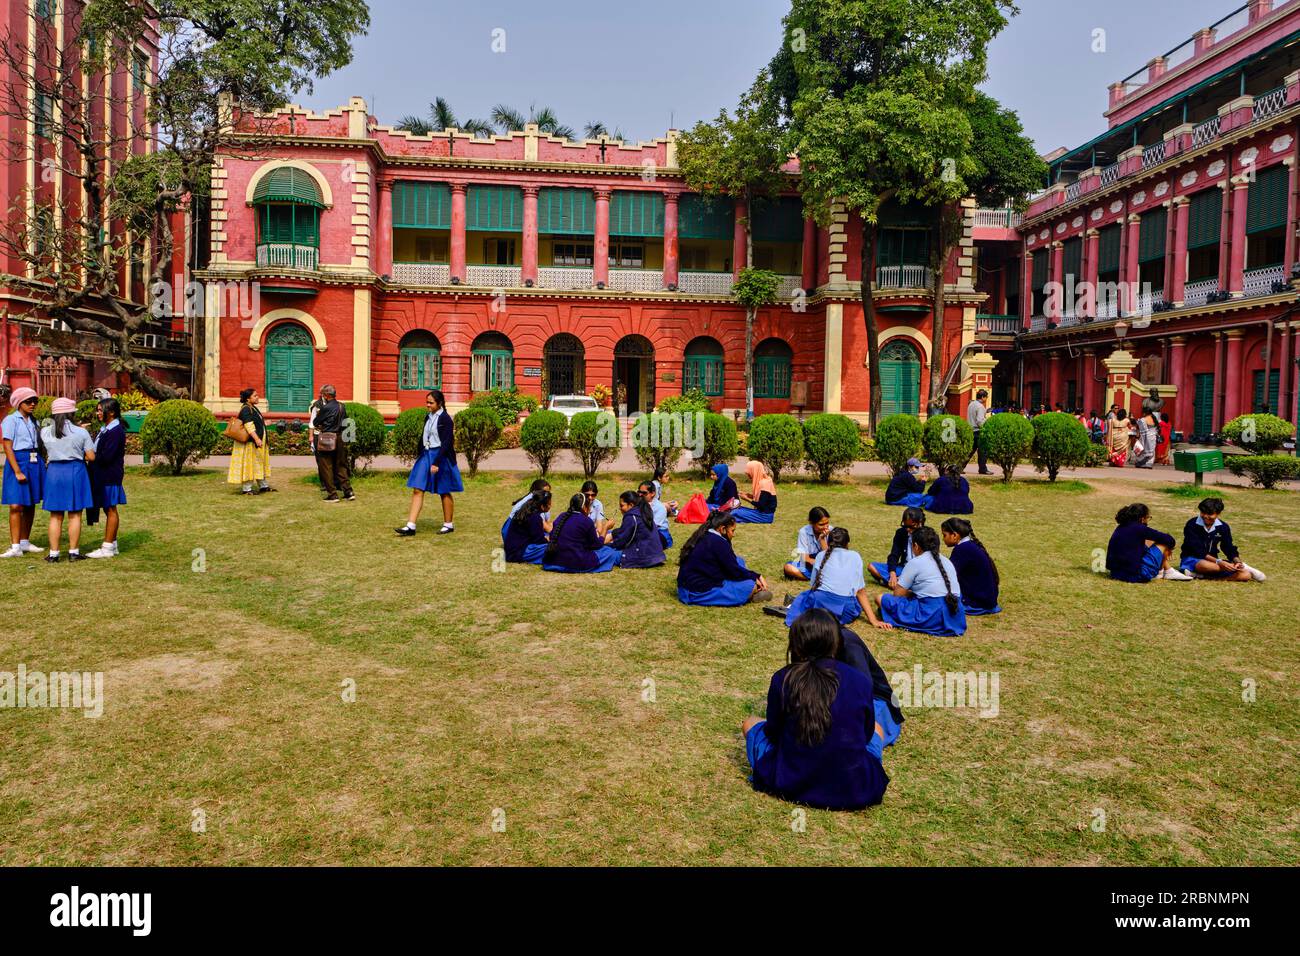 India, West Bengal, Kolkata, Calcutta, Rabindranath Tagore's House, great poet and first Indian Nobel laureate Stock Photo